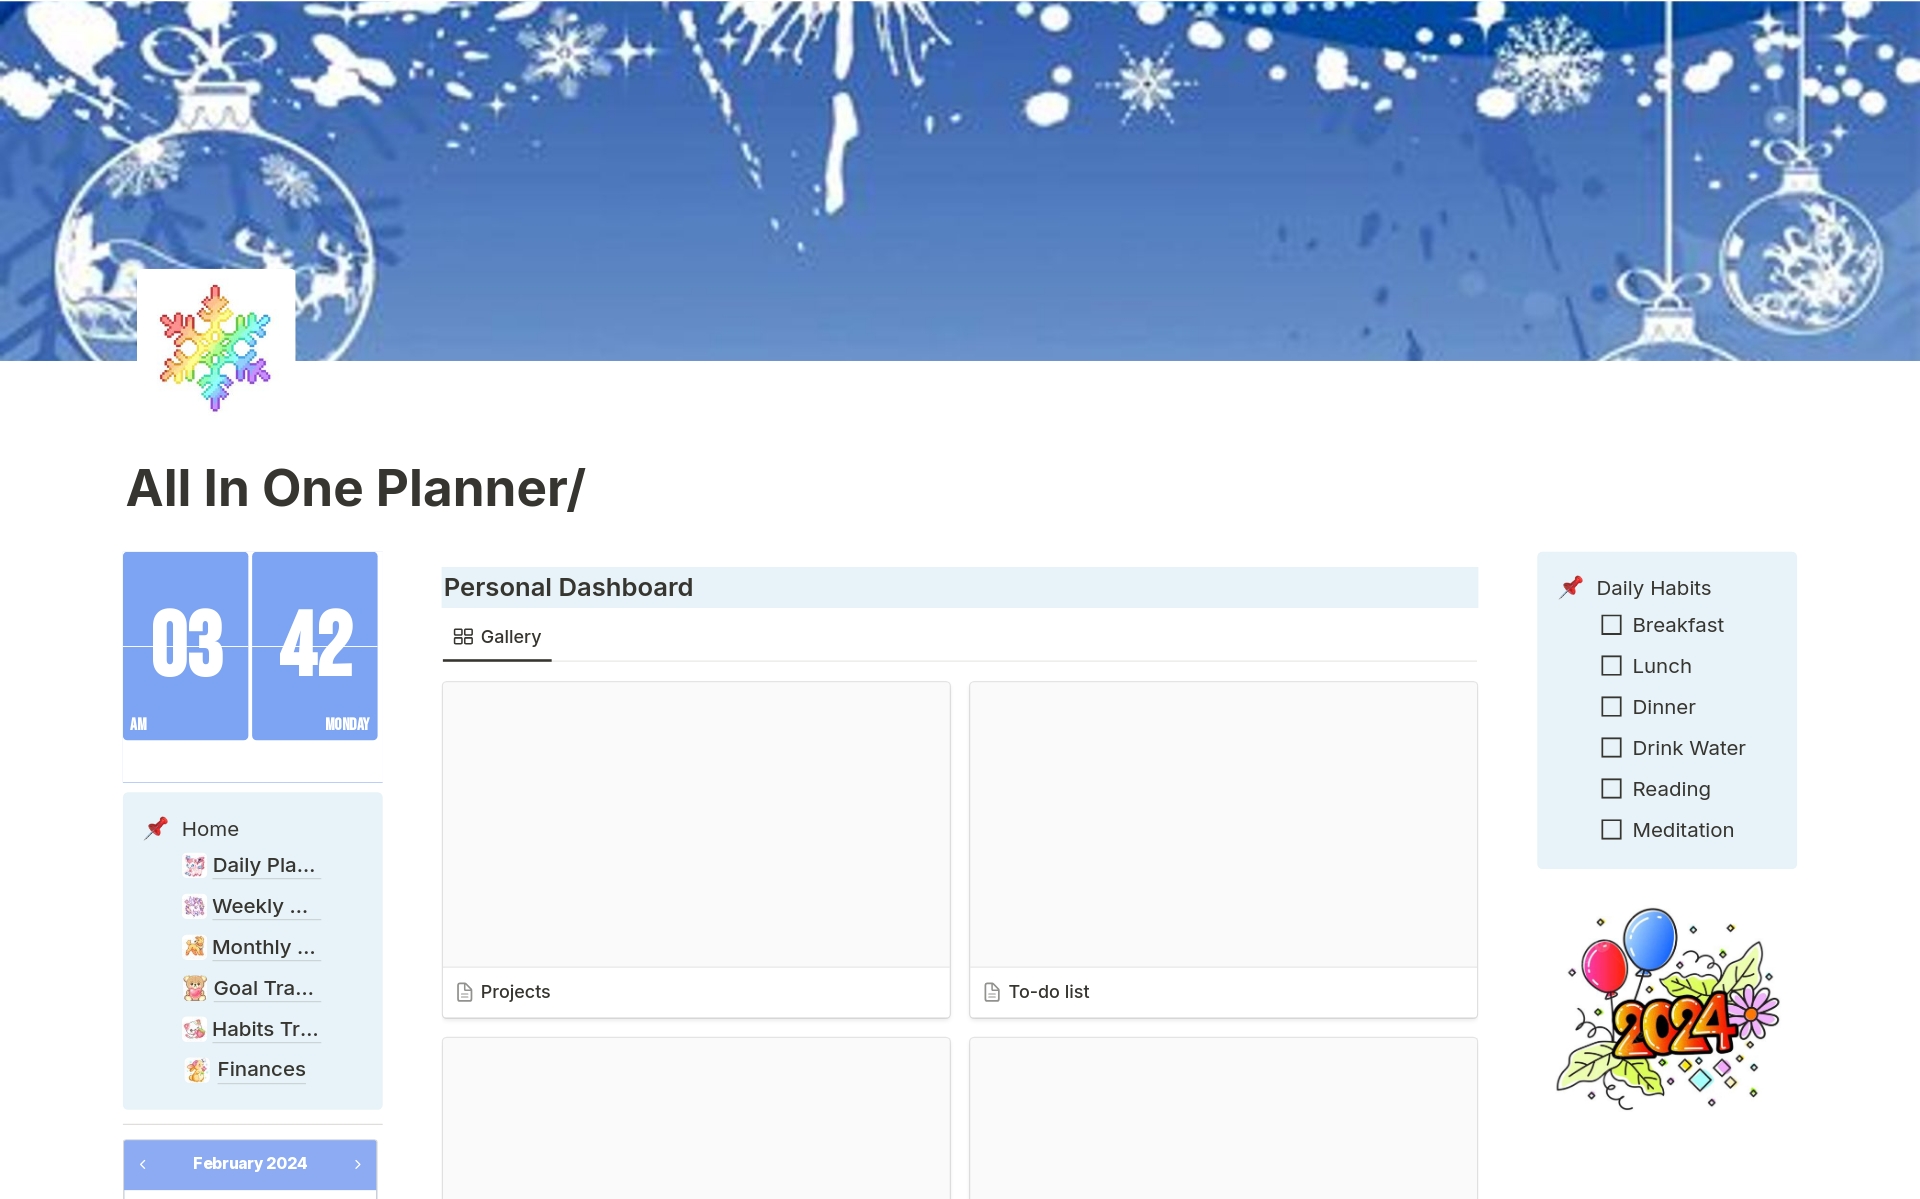 The All In One Planner is a comprehensive tool that helps you stay organized and manage your daily, weekly, and monthly tasks. With a variety of planner templates and trackers, you can easily plan your schedule, set goals, track habits, and manage your finances all in one place.